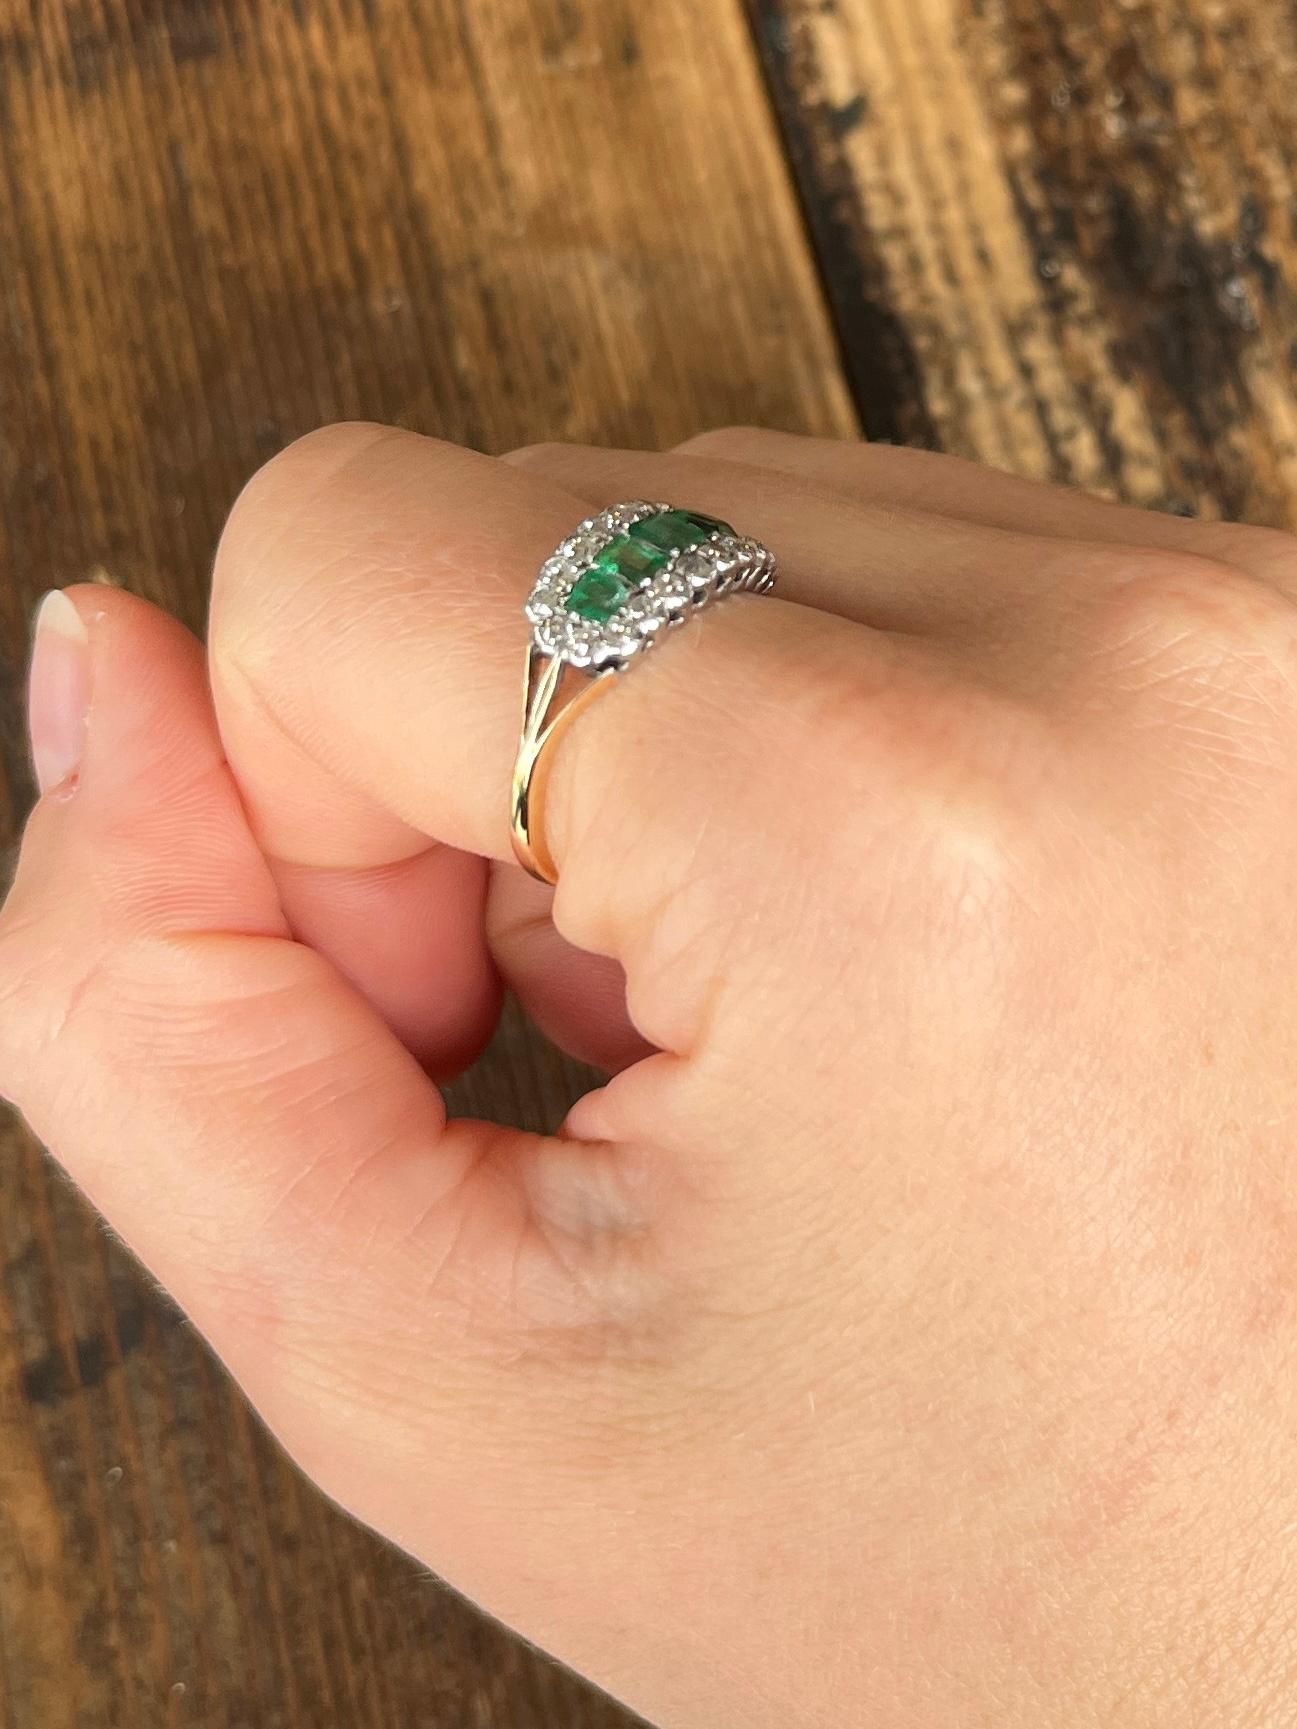 An exquisite five-stone ring set with beautiful square cut emeralds which total 1.1ct. Surrounding the bright emeralds there is a halo of diamonds. The diamonds total 66pts and the stones are all set in platinum and the band is modelled in 18carat